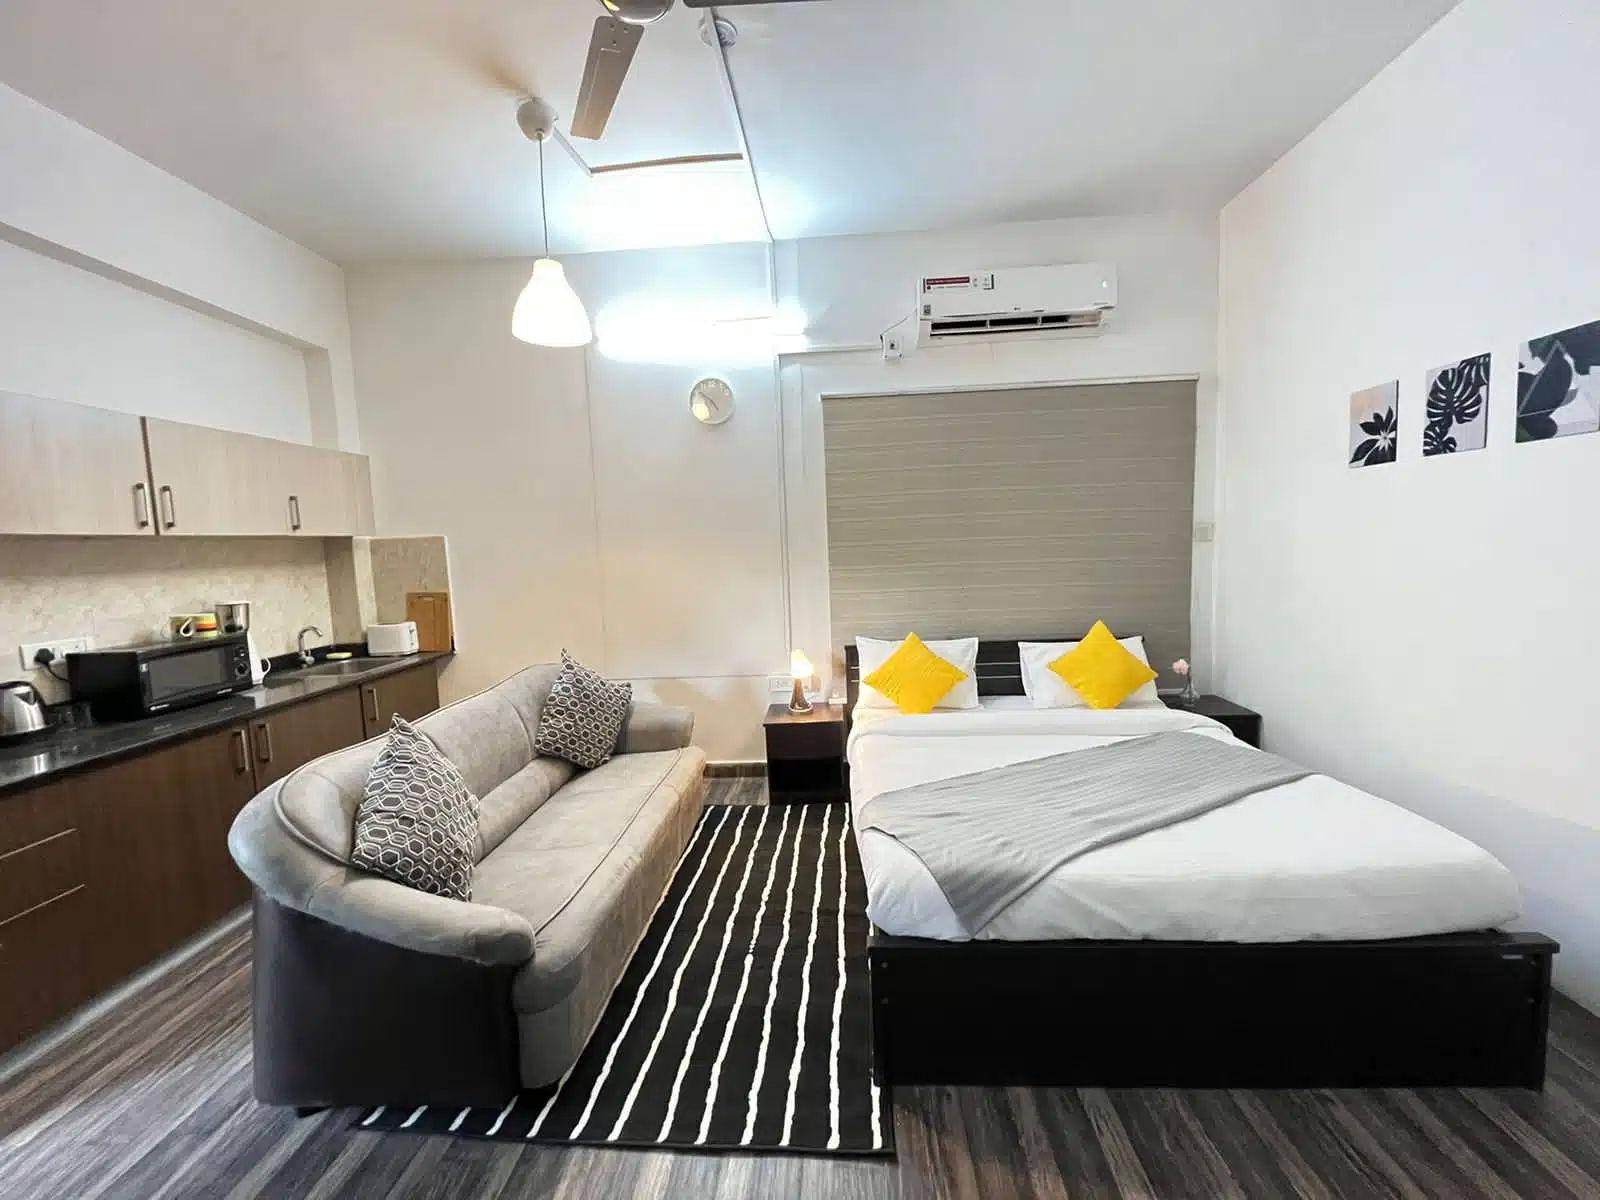 Sofa and bed, Studio Service apartment (Jubilee hills)